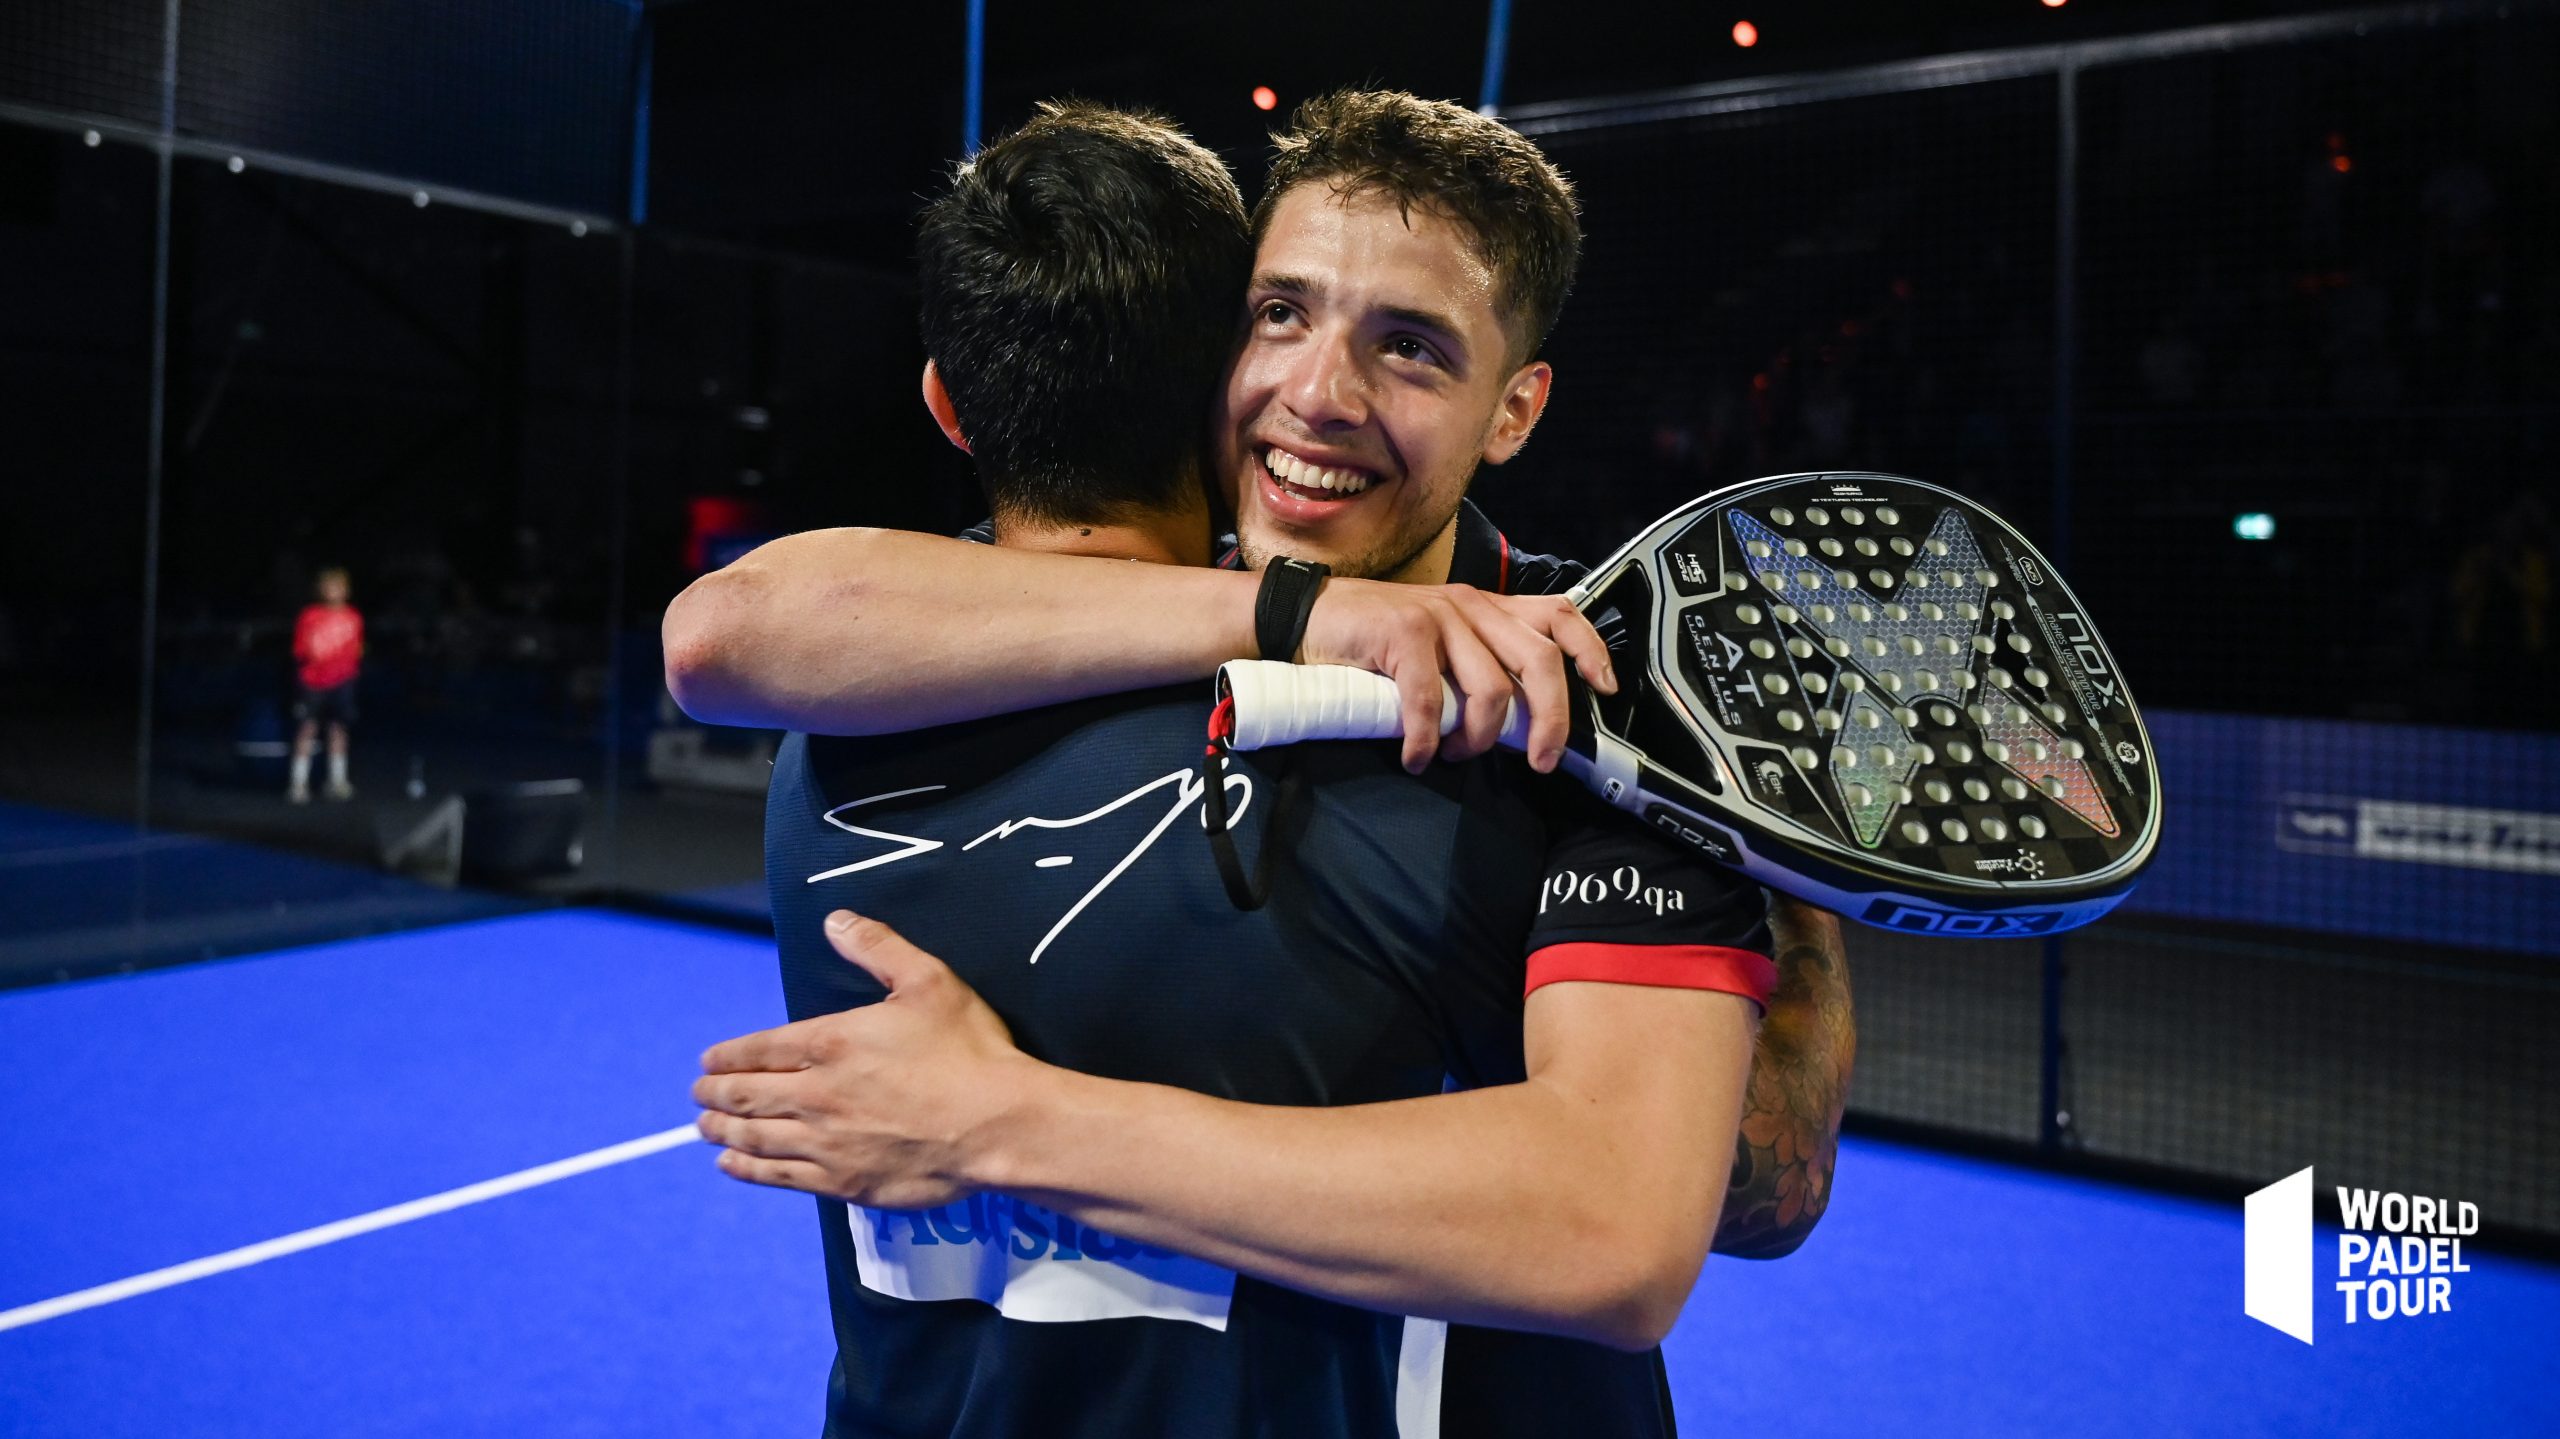 Danish Padel Open 2022: Tapia and Gutiérrez come back to win second title of 2022